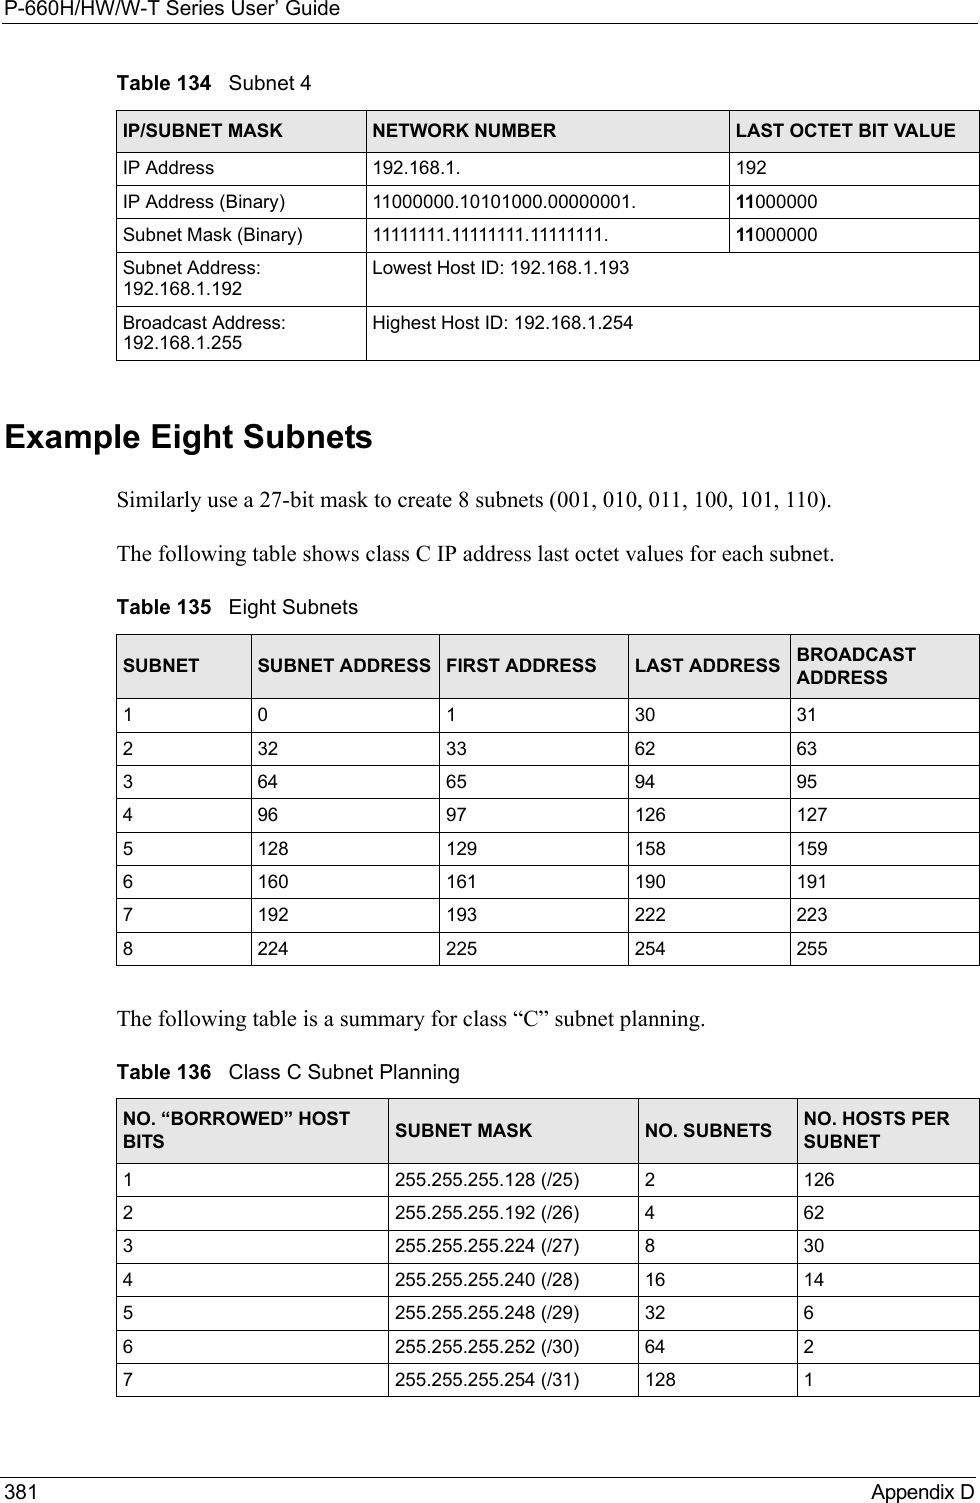 P-660H/HW/W-T Series User’ Guide381 Appendix DExample Eight SubnetsSimilarly use a 27-bit mask to create 8 subnets (001, 010, 011, 100, 101, 110). The following table shows class C IP address last octet values for each subnet.The following table is a summary for class “C” subnet planning.Table 134   Subnet 4IP/SUBNET MASK NETWORK NUMBER LAST OCTET BIT VALUEIP Address 192.168.1. 192IP Address (Binary) 11000000.10101000.00000001. 11000000Subnet Mask (Binary) 11111111.11111111.11111111. 11000000Subnet Address: 192.168.1.192Lowest Host ID: 192.168.1.193Broadcast Address: 192.168.1.255Highest Host ID: 192.168.1.254Table 135   Eight SubnetsSUBNET SUBNET ADDRESS FIRST ADDRESS LAST ADDRESS BROADCAST ADDRESS1 0 1 30 31232 33 62 63364 65 94 95496 97 126 1275128 129 158 1596160 161 190 1917192 193 222 2238224 225 254 255Table 136   Class C Subnet PlanningNO. “BORROWED” HOST BITS SUBNET MASK NO. SUBNETS NO. HOSTS PER SUBNET1255.255.255.128 (/25) 21262255.255.255.192 (/26) 4623255.255.255.224 (/27) 8304255.255.255.240 (/28) 16 145255.255.255.248 (/29) 32 66255.255.255.252 (/30) 64 27255.255.255.254 (/31) 128 1